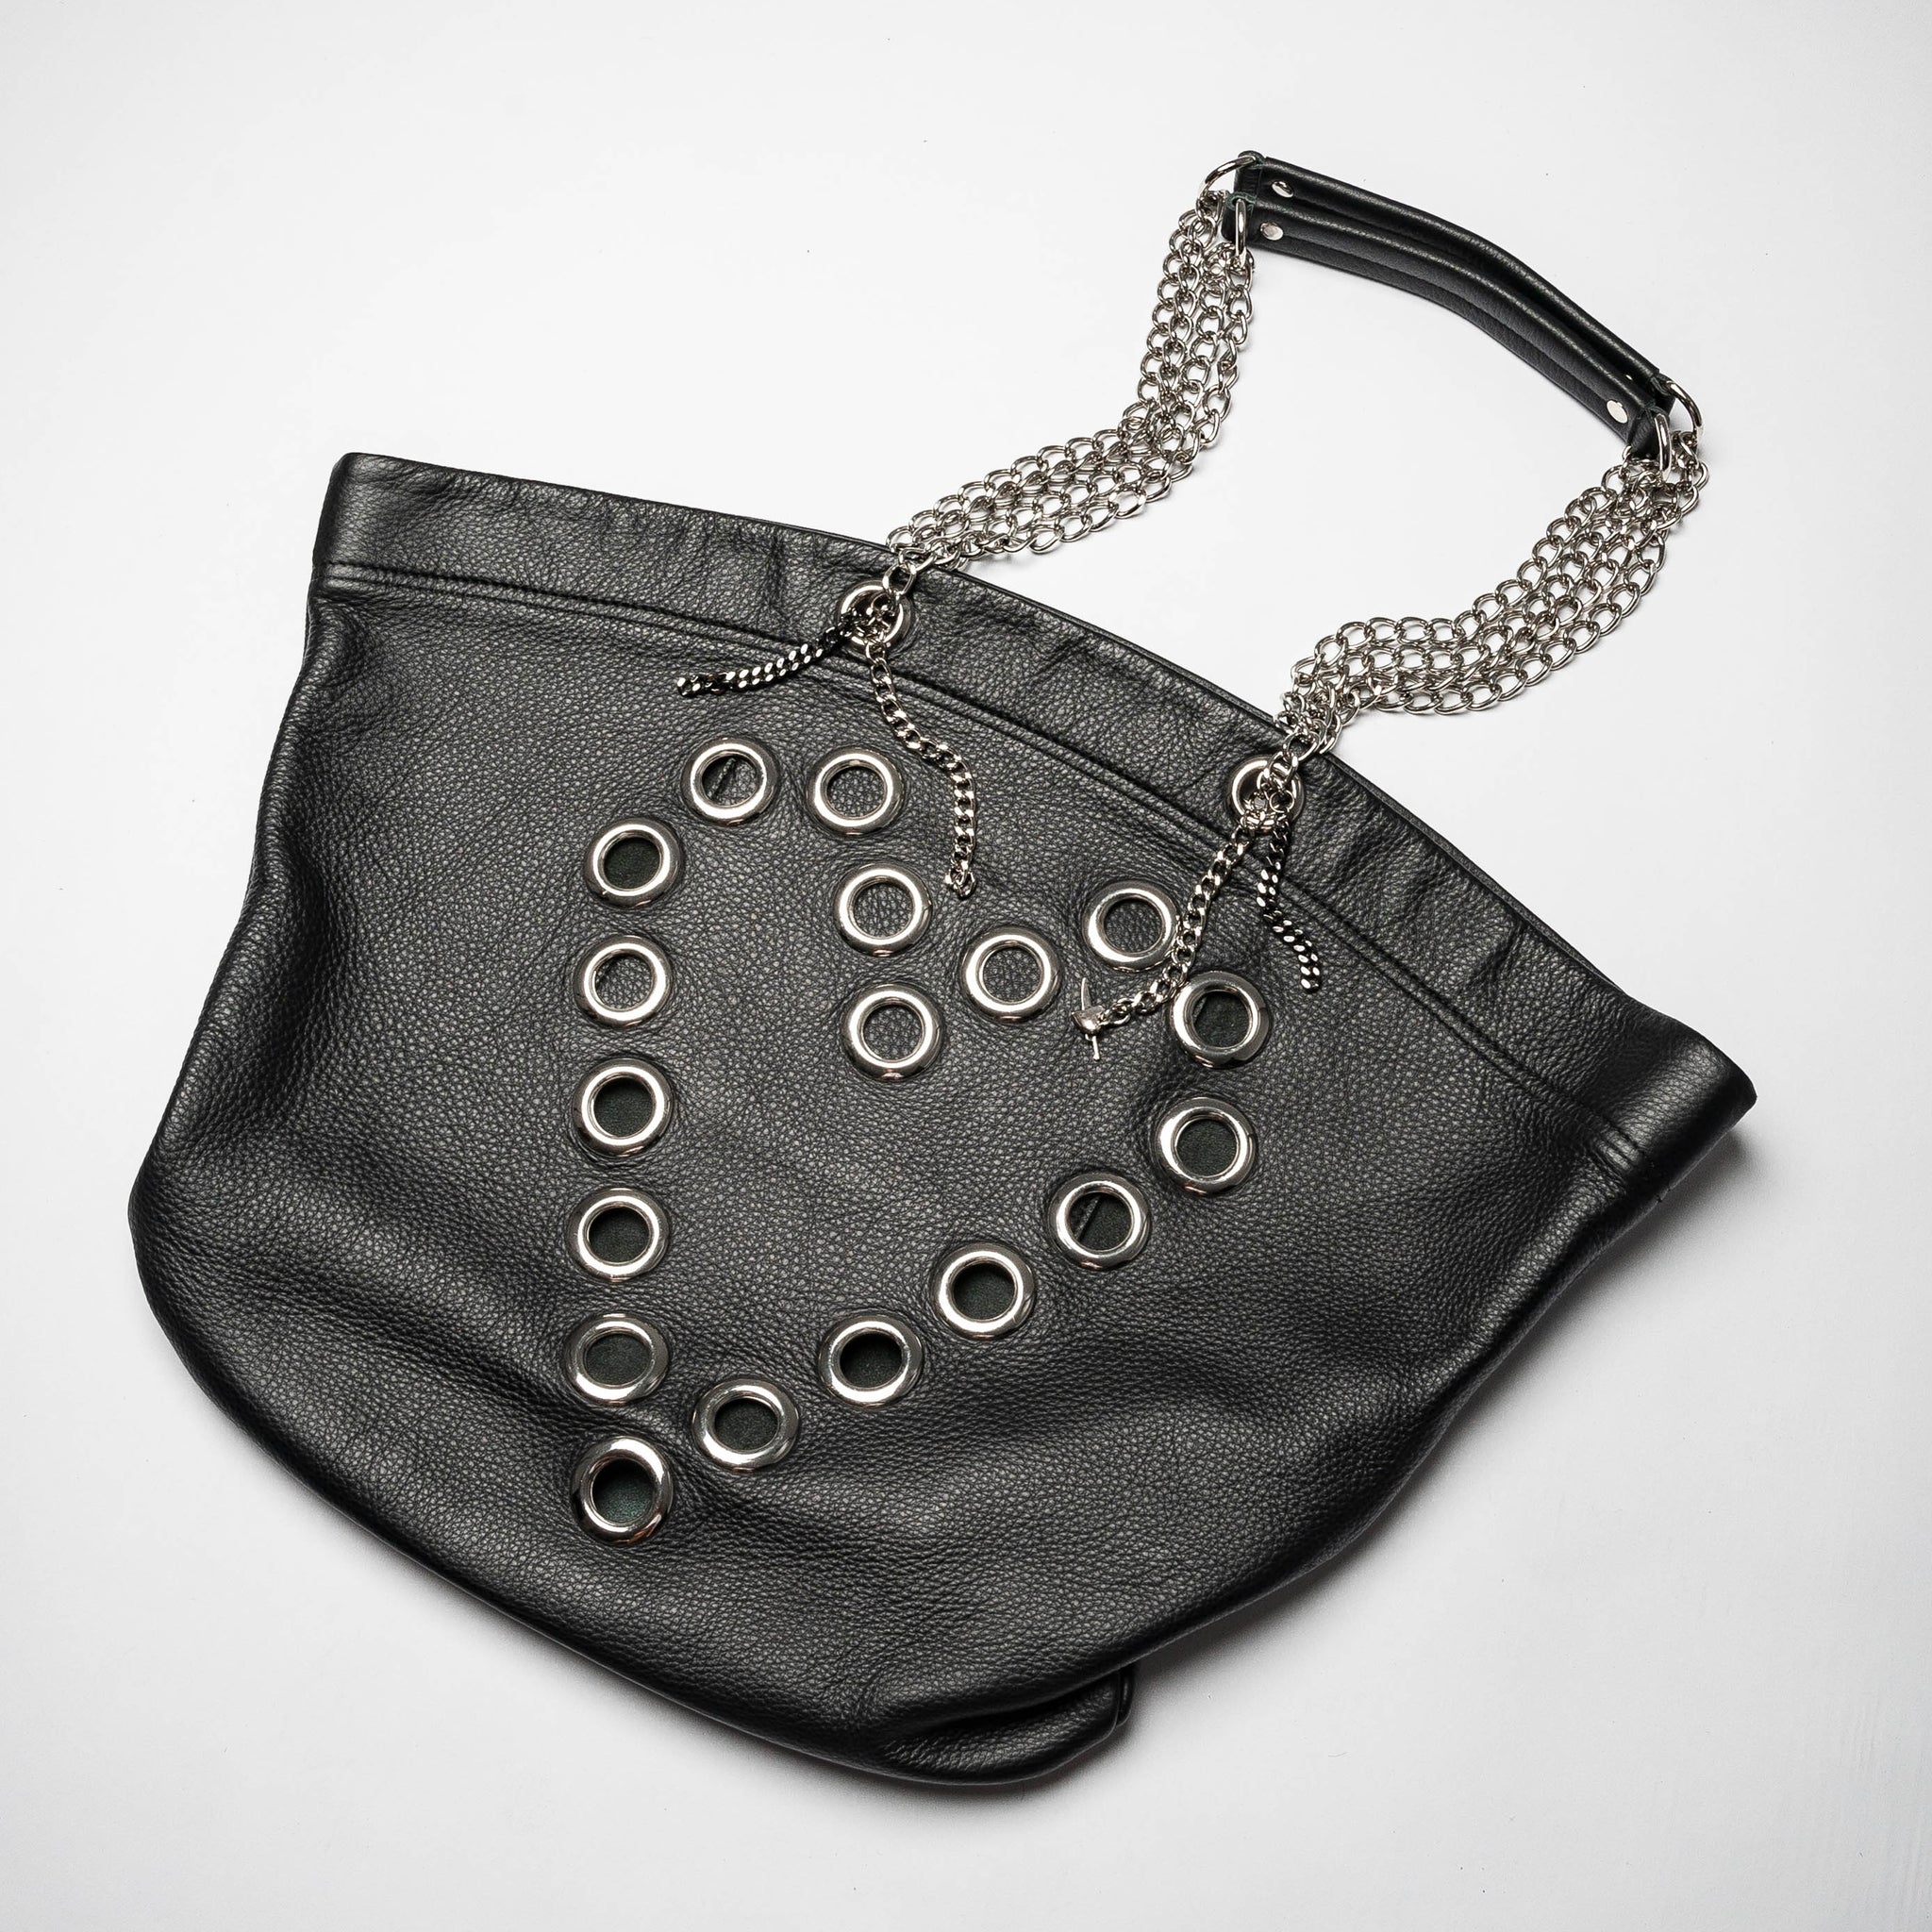 Heartbreak tote bag with metal chain